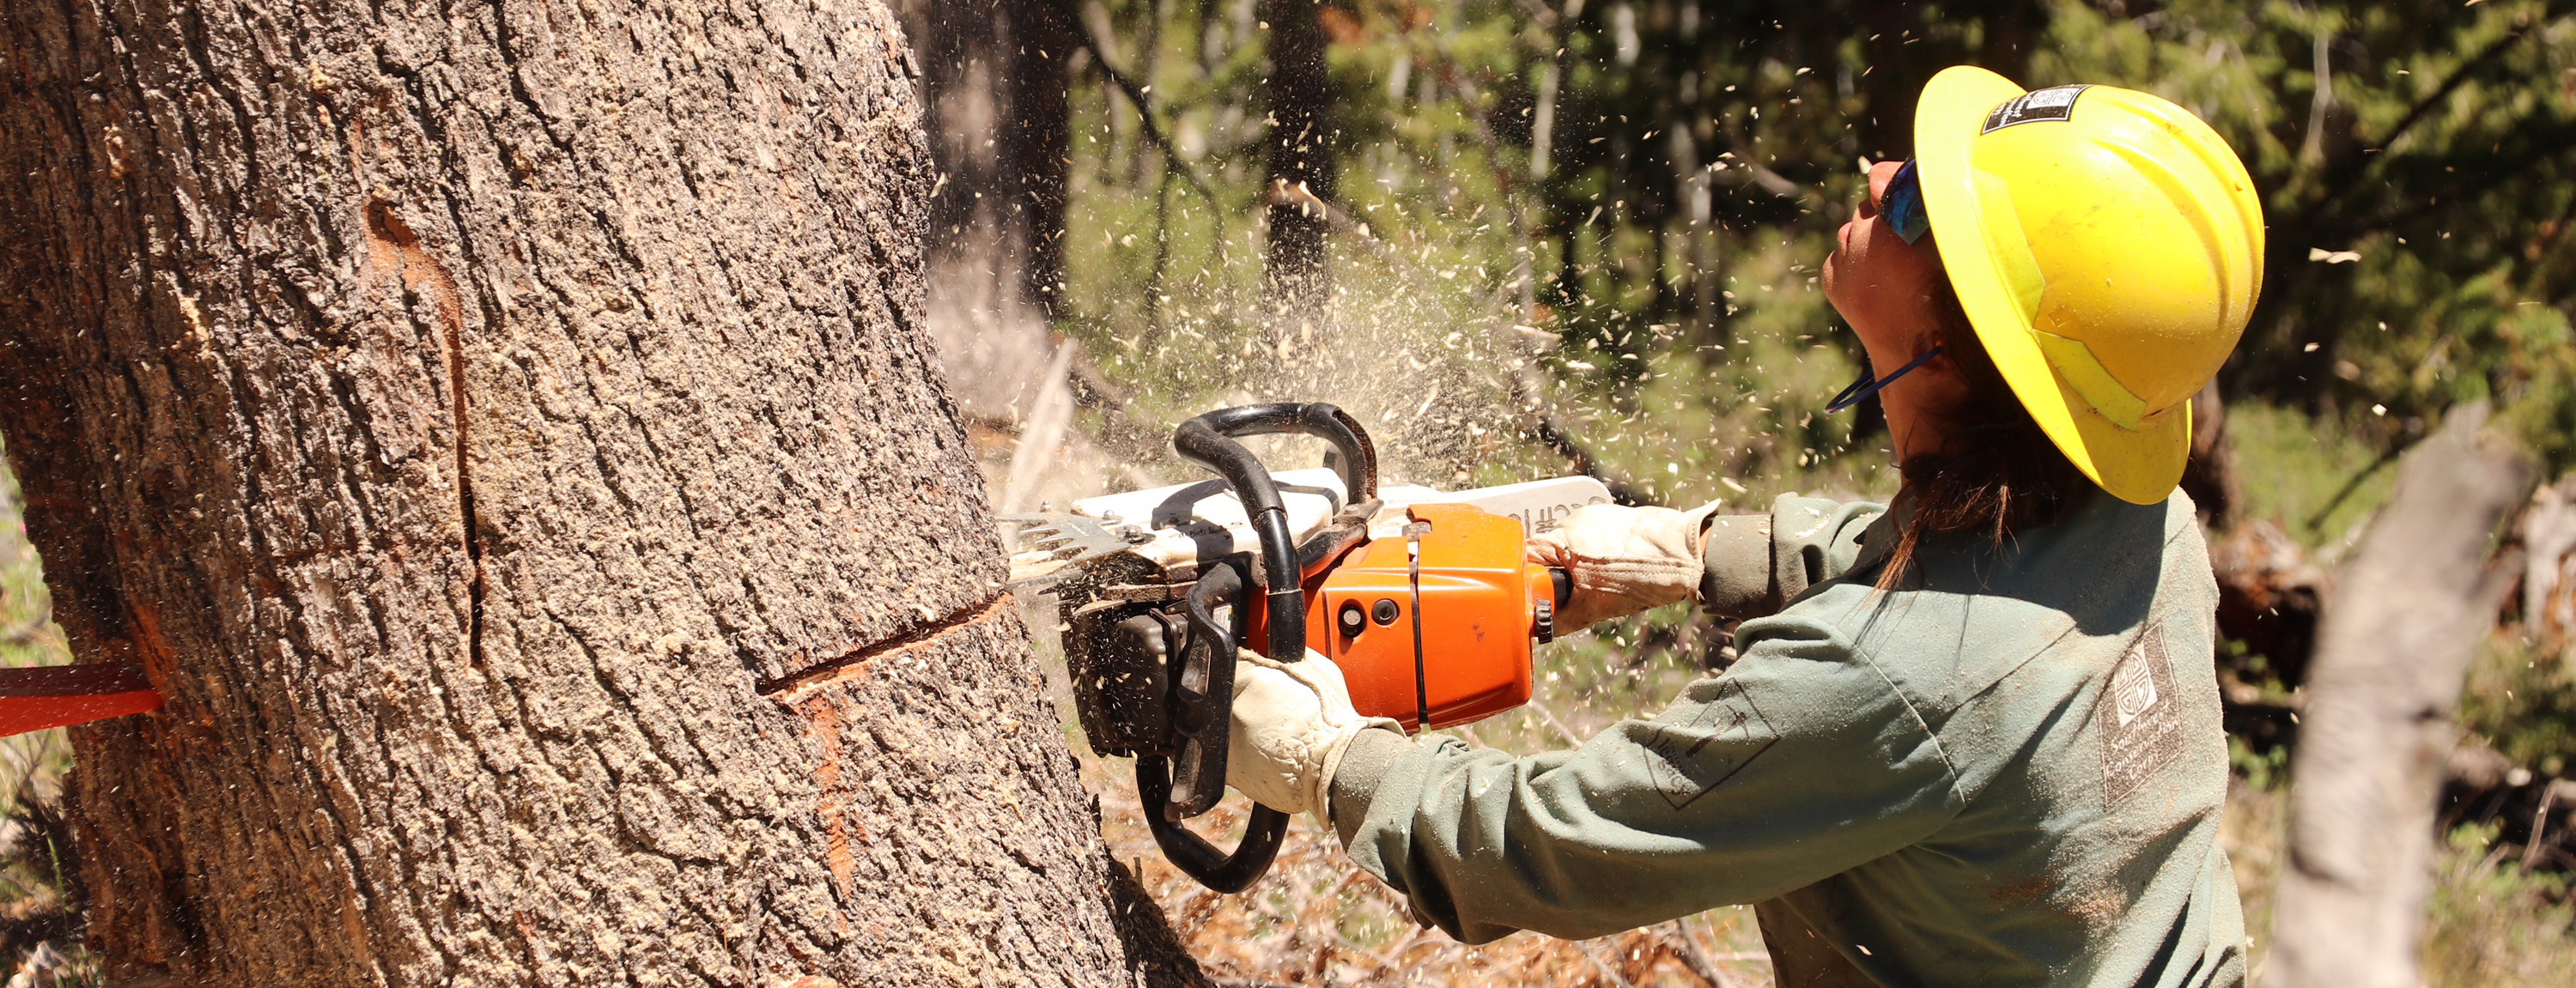 Crew member sawing a tree